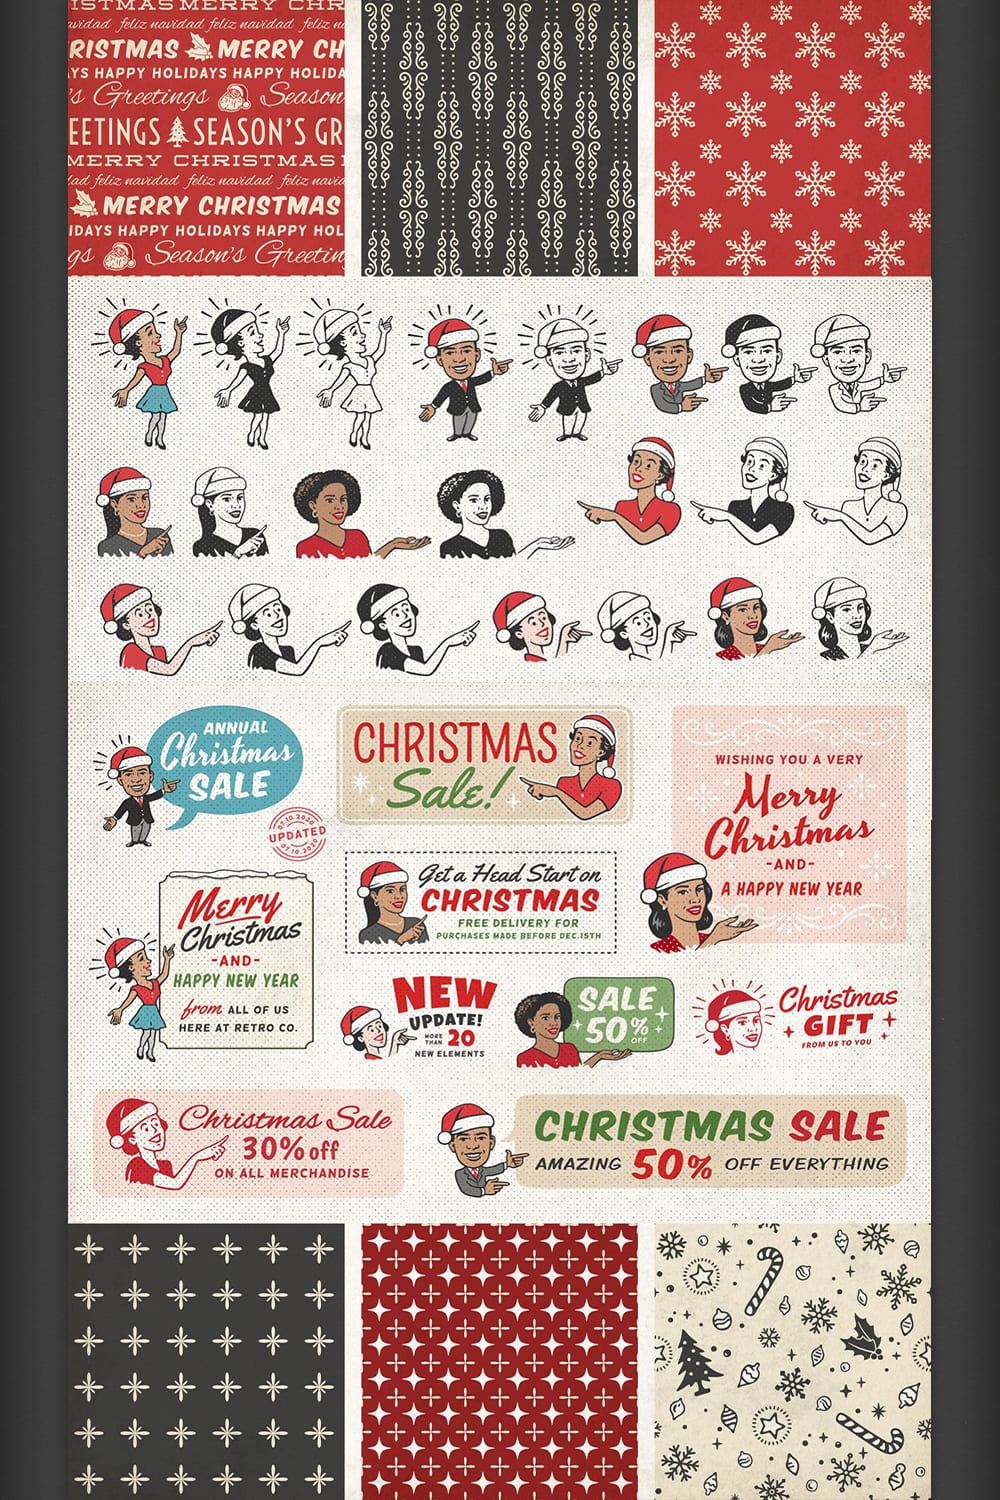 Colorful collection of vintage Christmas attributes.